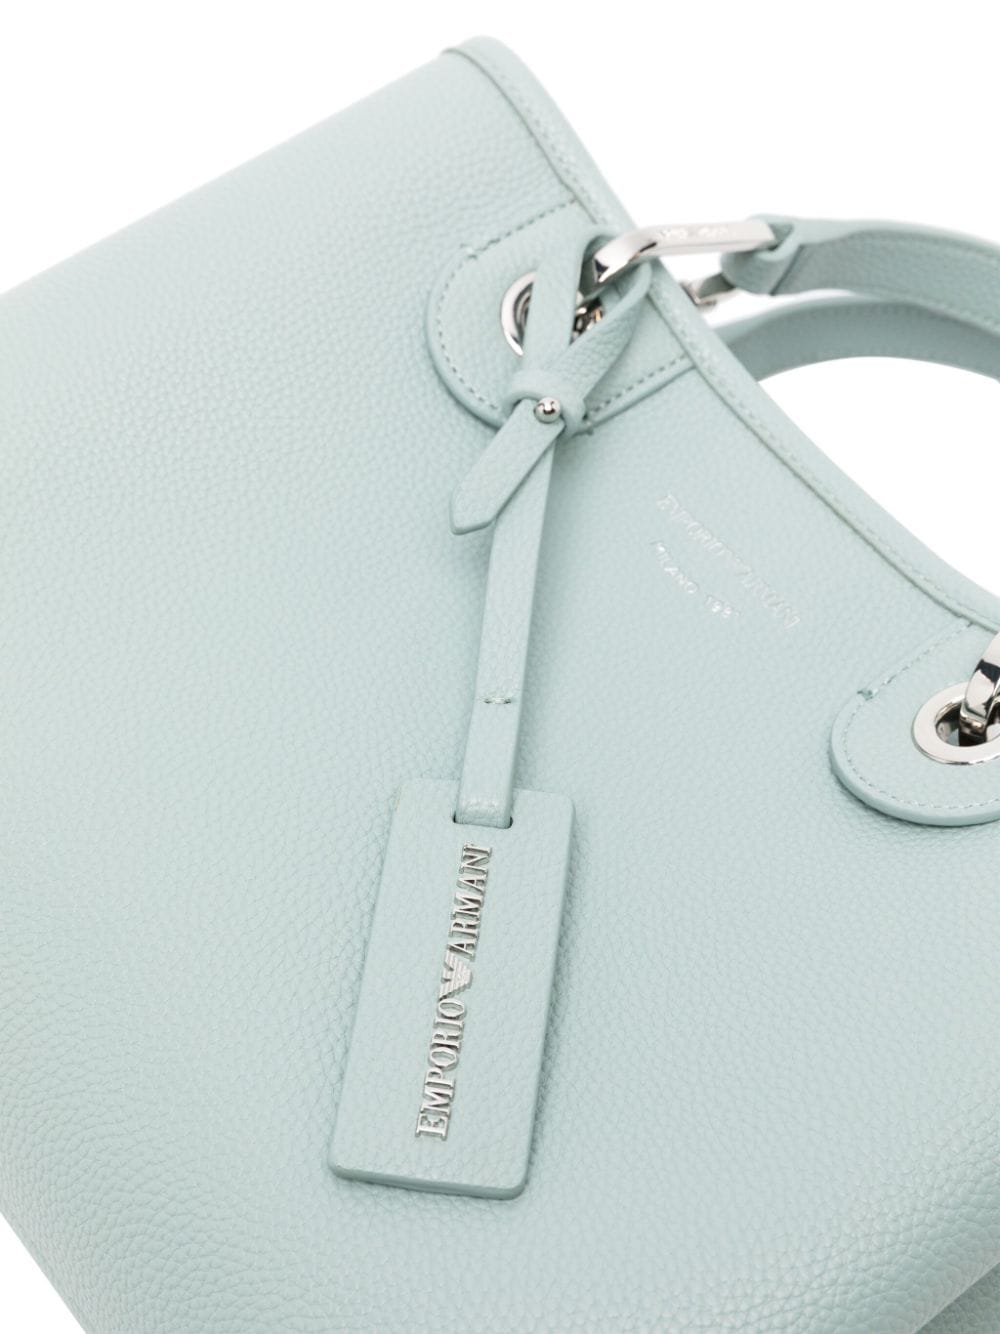 Light Blue Faux Leather Grained Texture Handbag with Logo Charm and Adjustable Strap